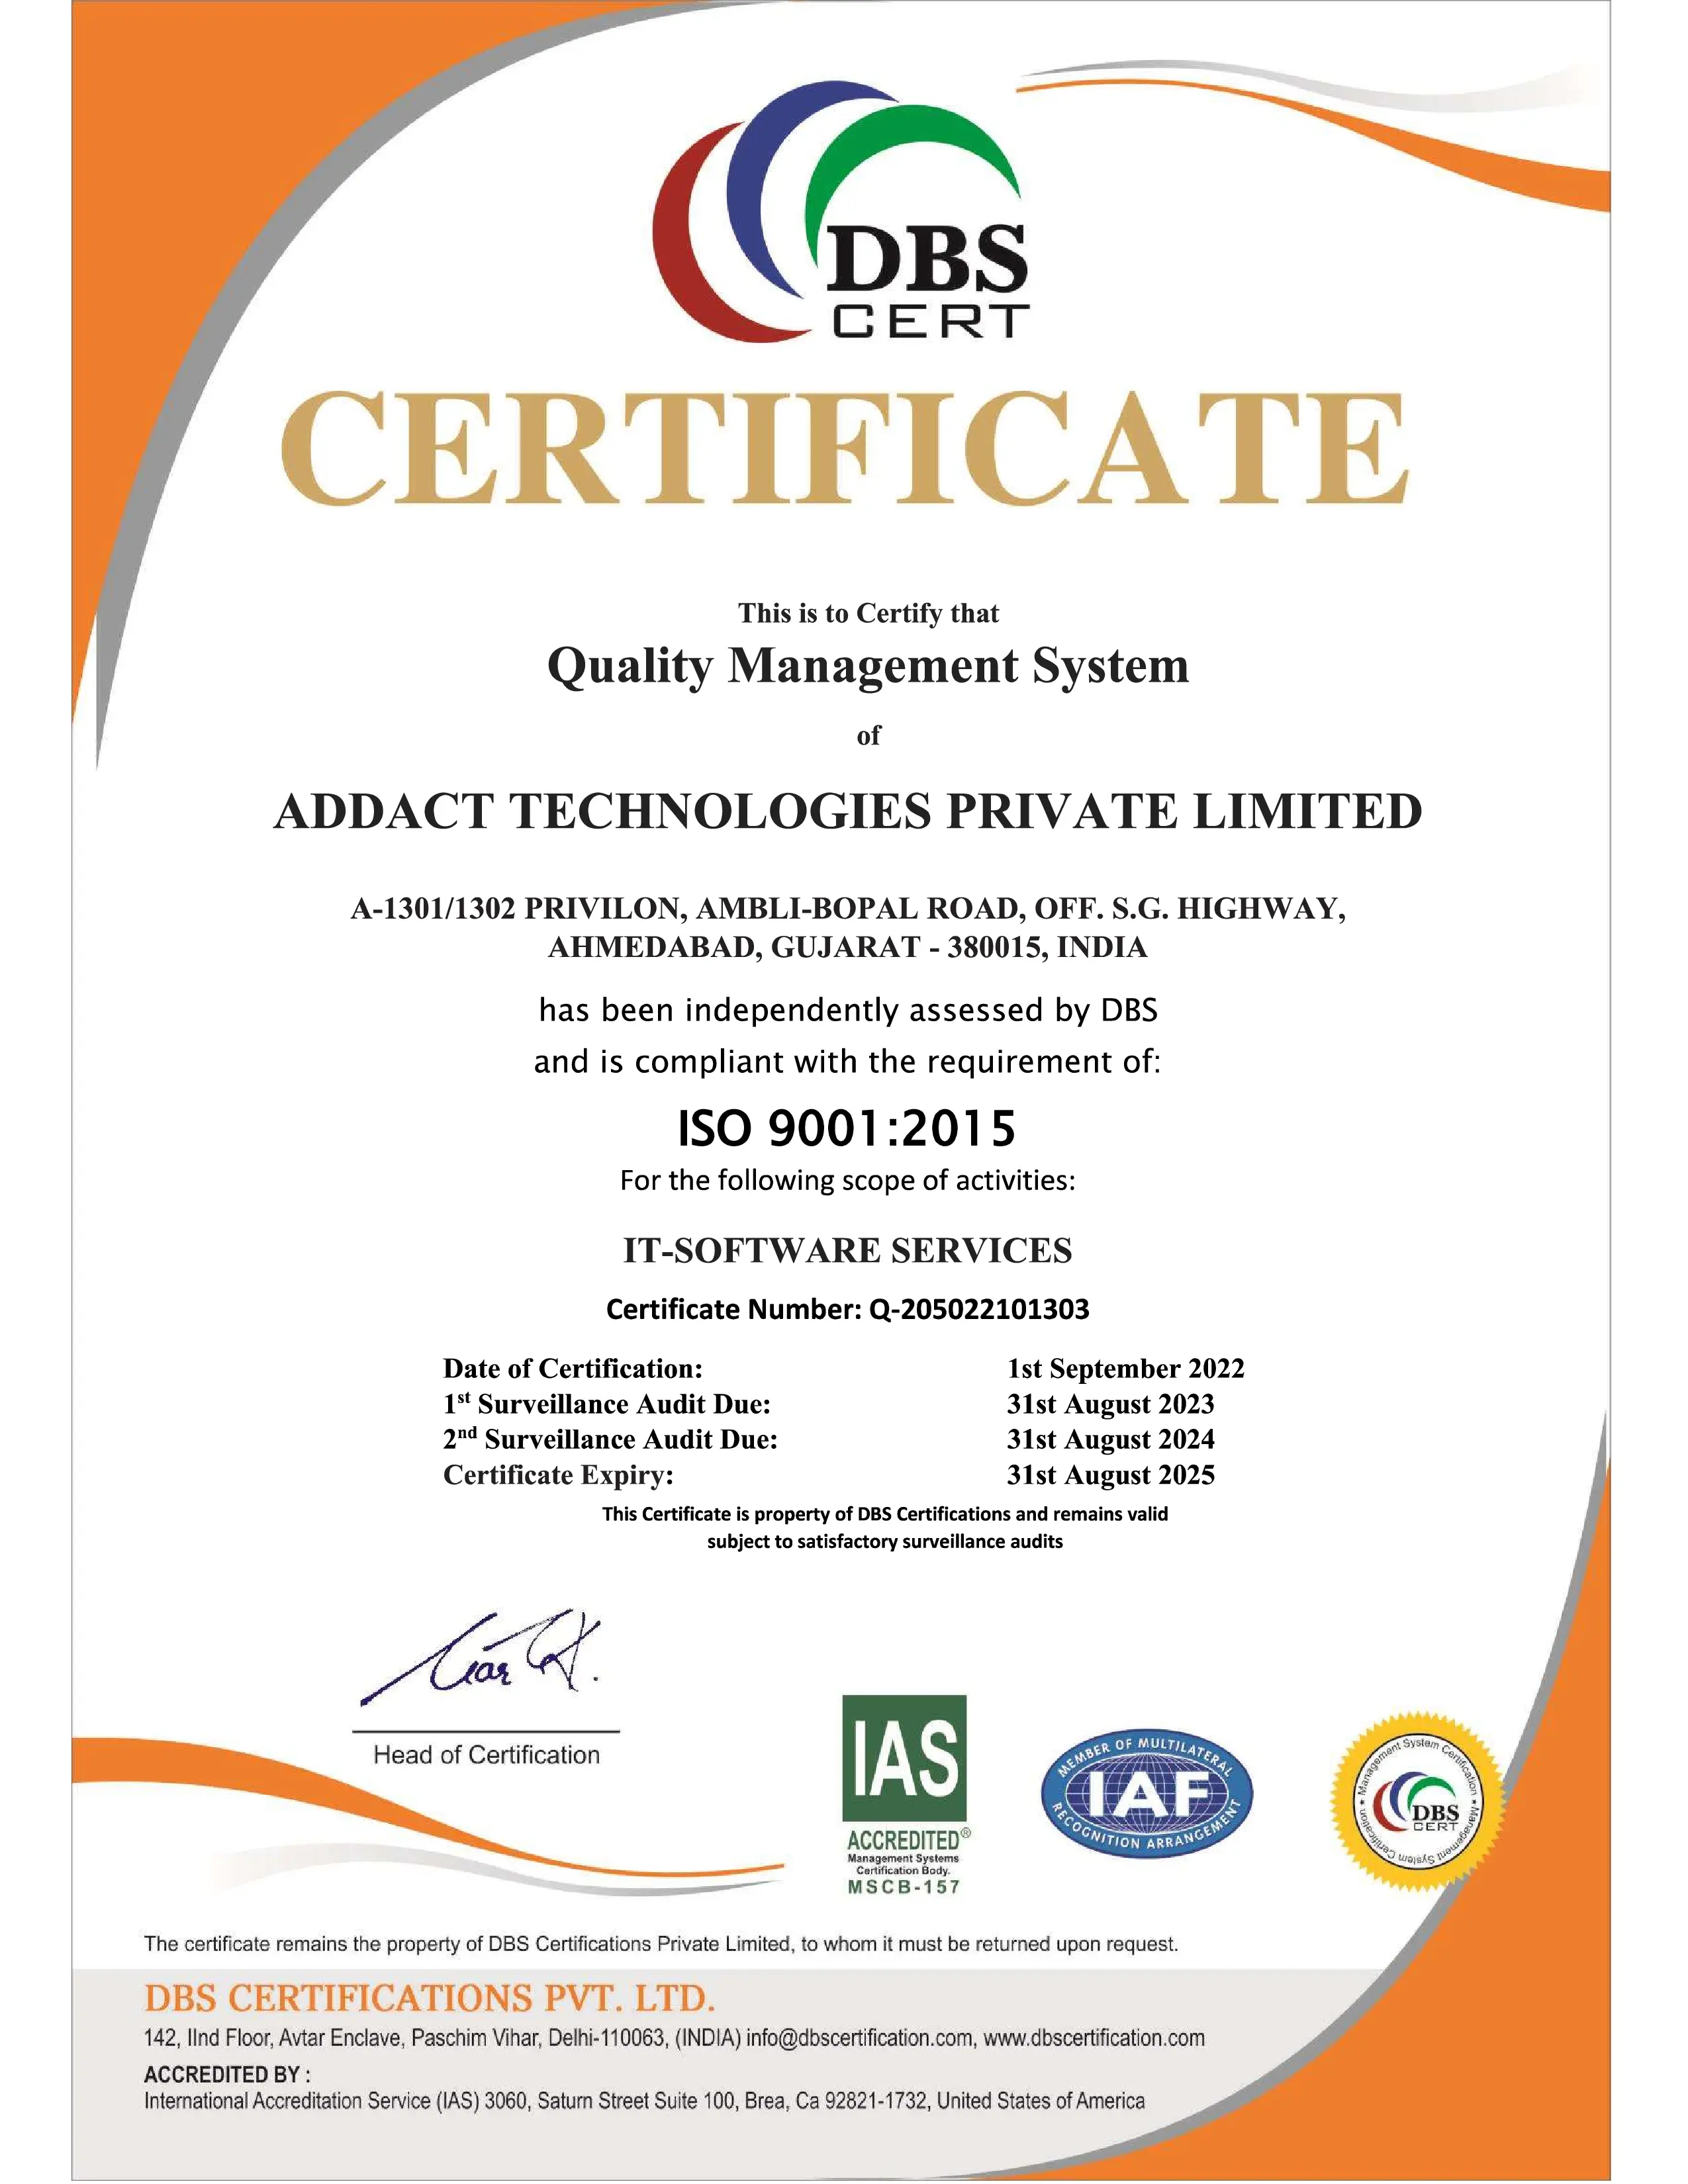 addact-achieves-iso-certification-for-quality-management-system-and-information-security-management-system-1